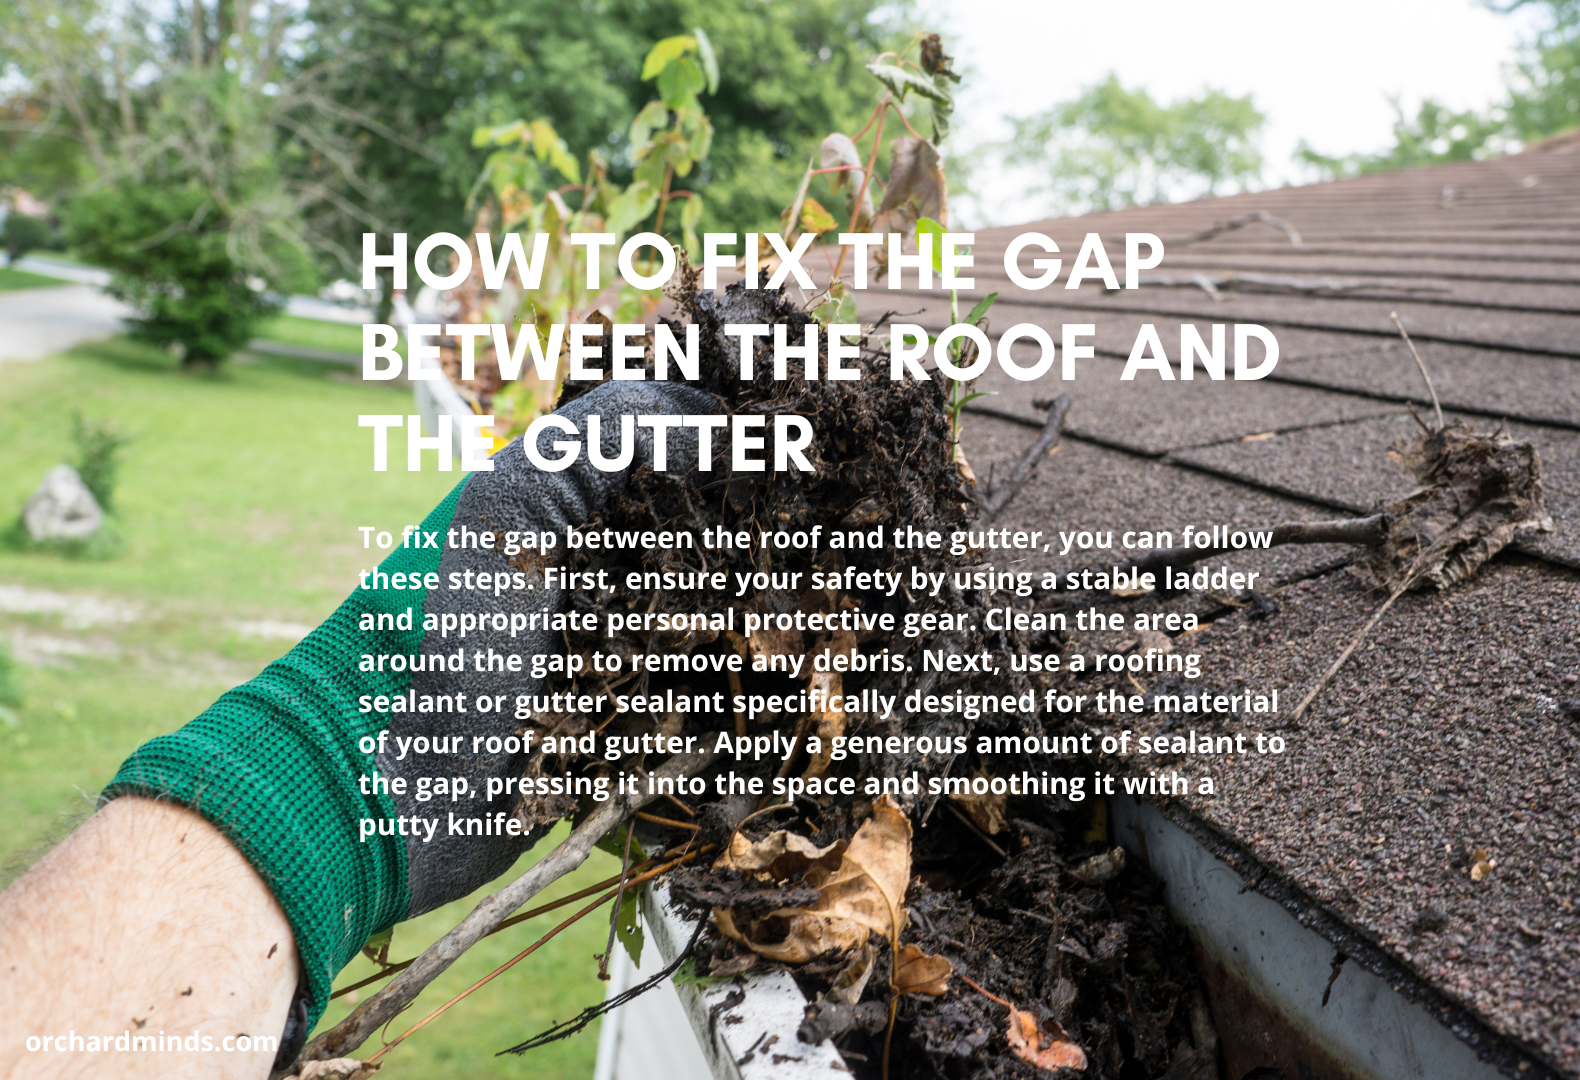 How to fix the gap between the roof and the gutter